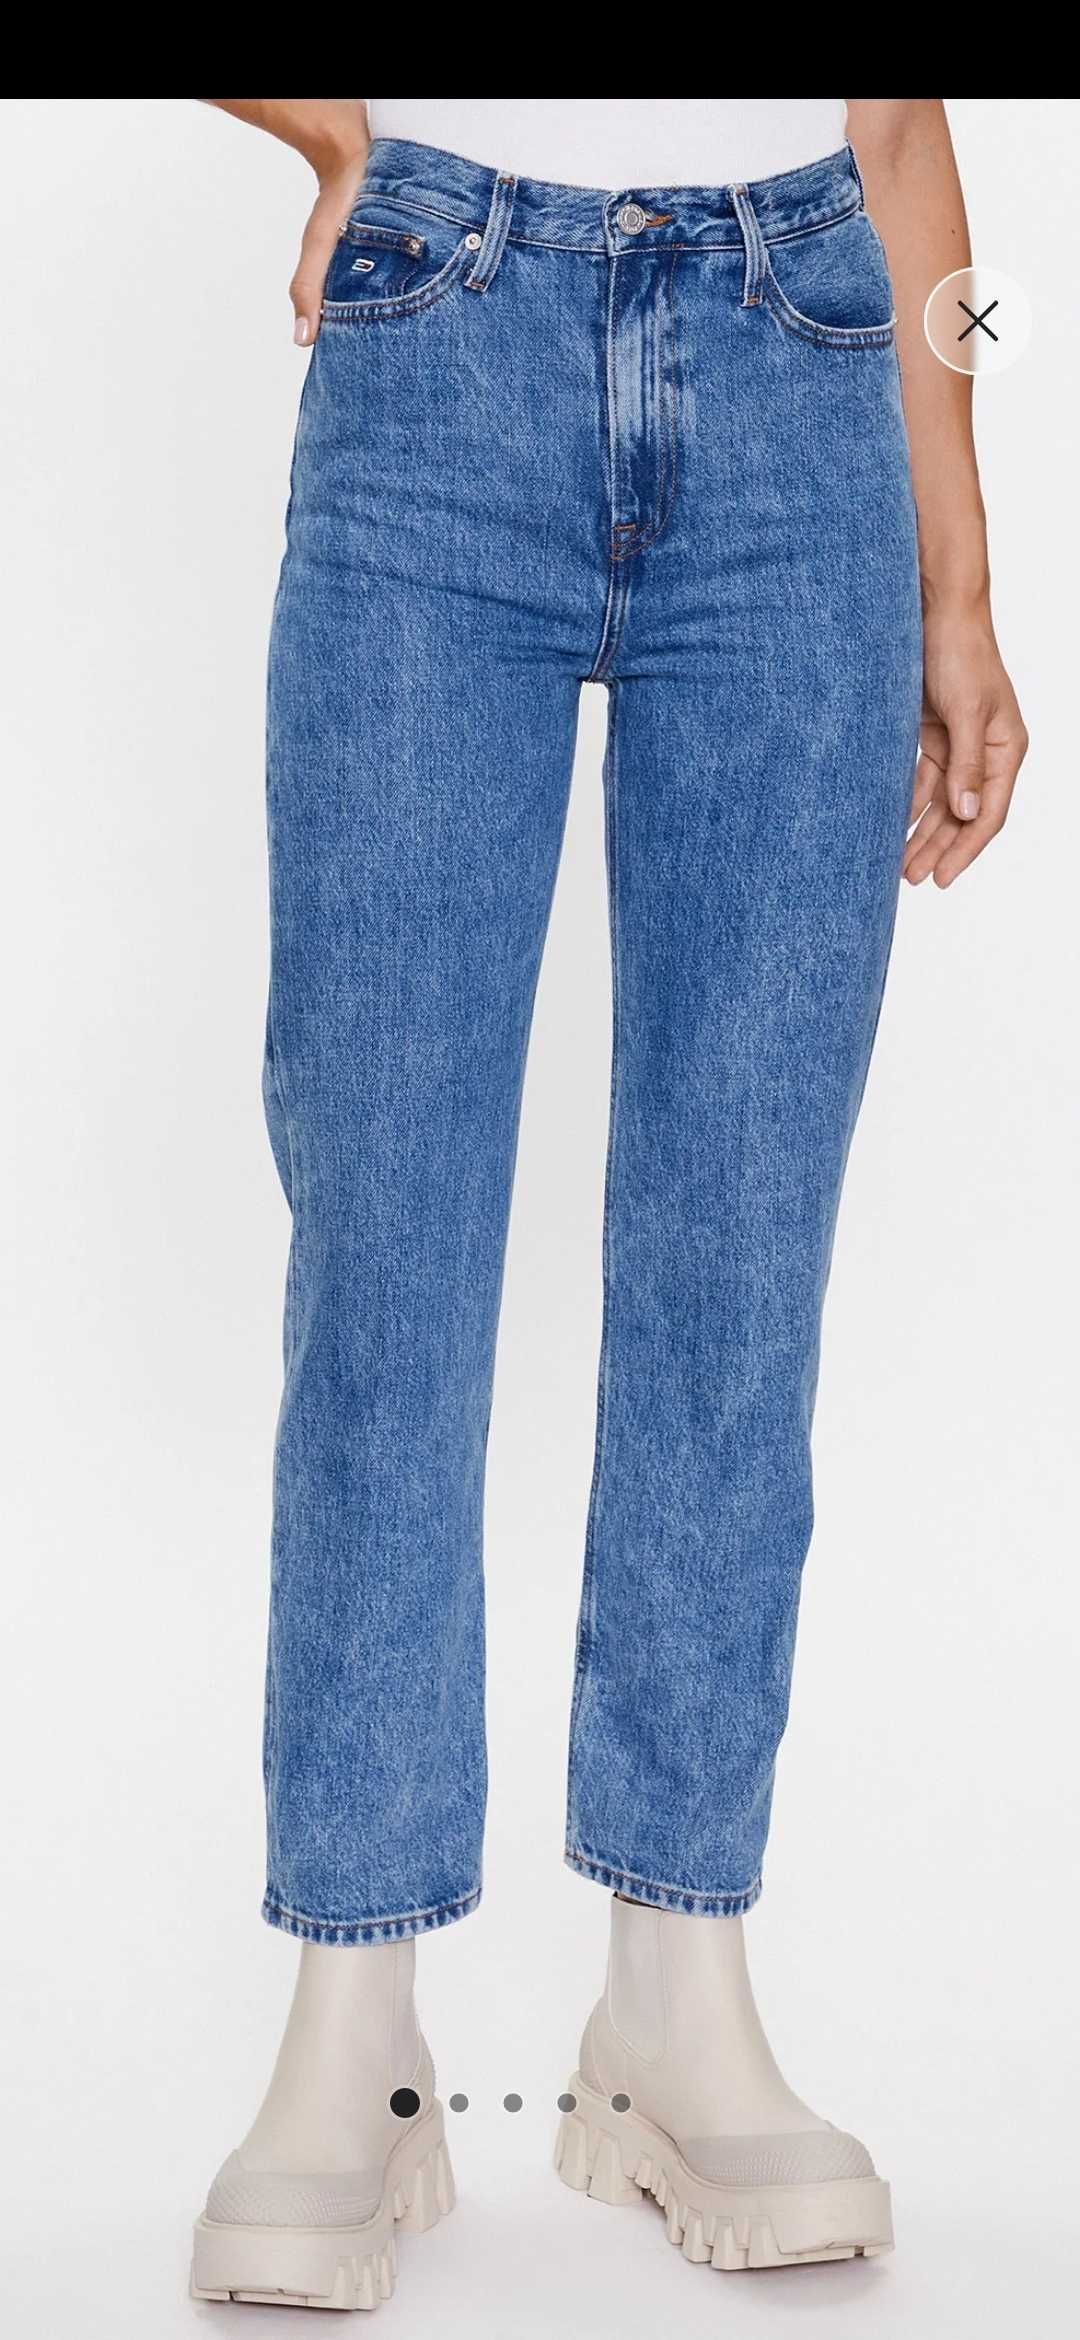 Straight legs Tommy Hilfiger jeans